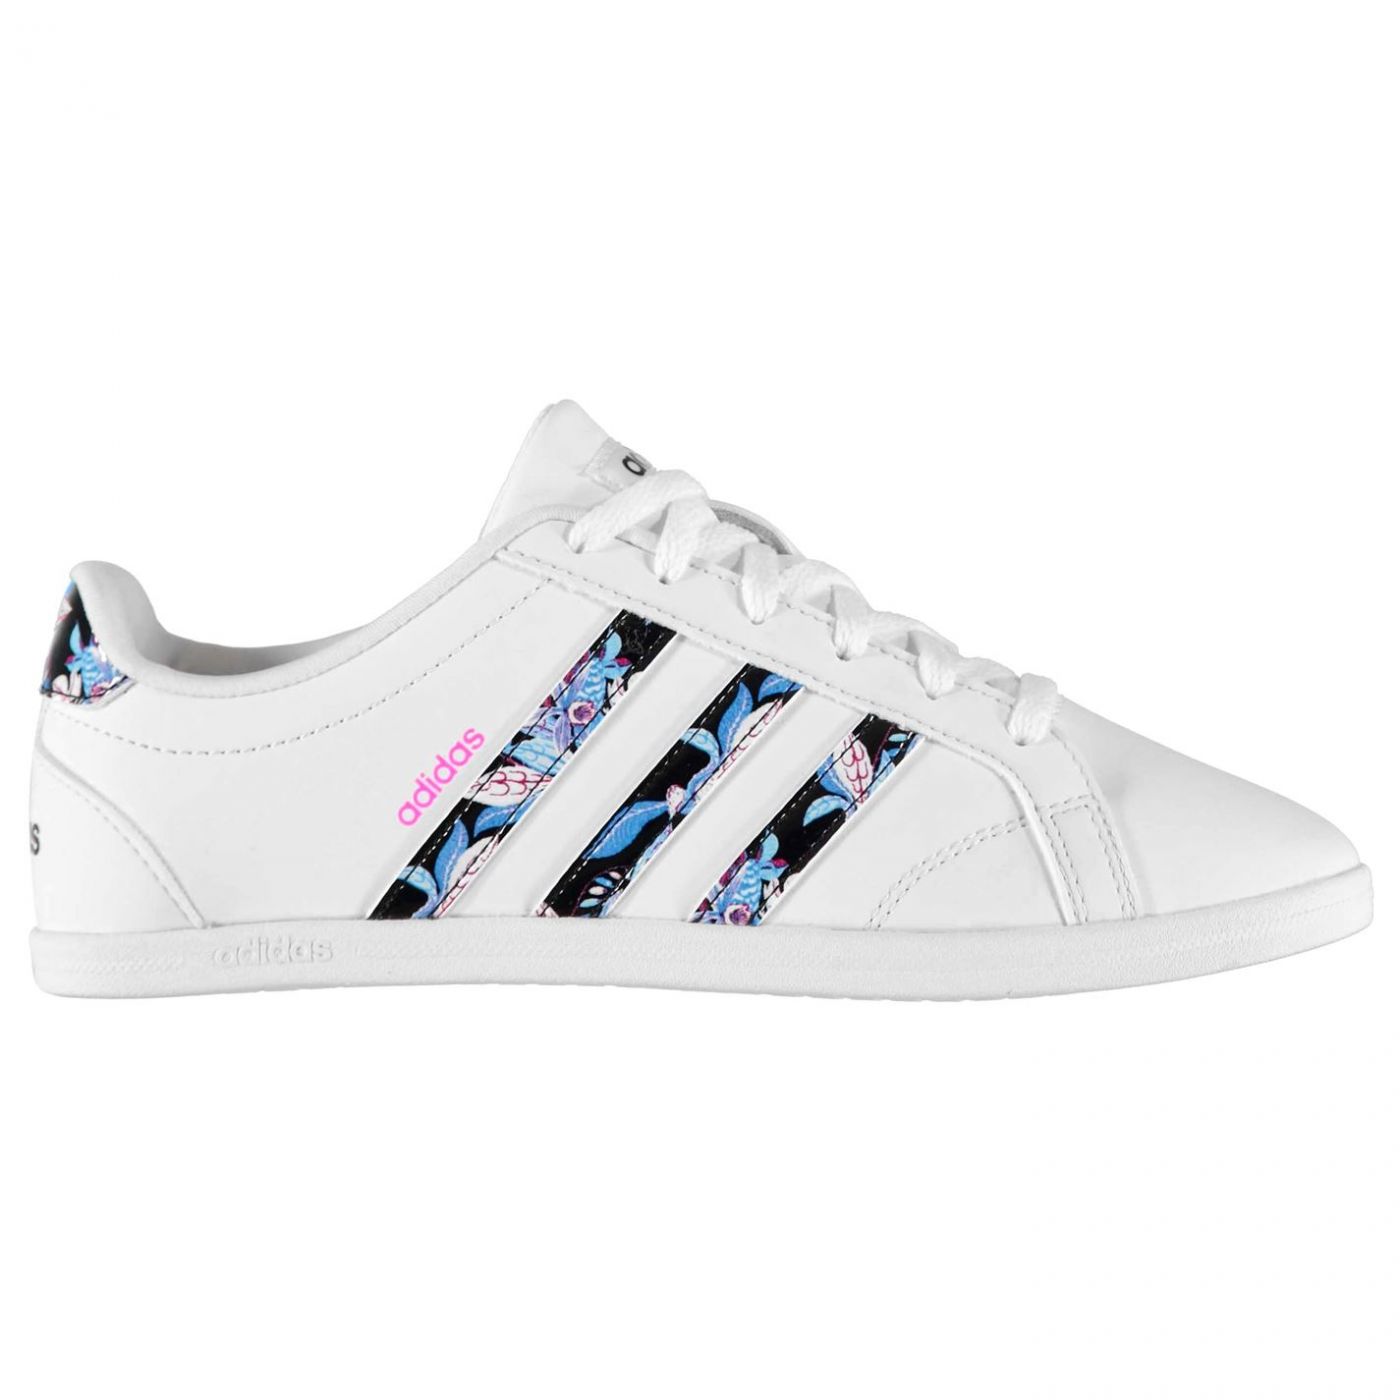 adidas coneo qt trainers